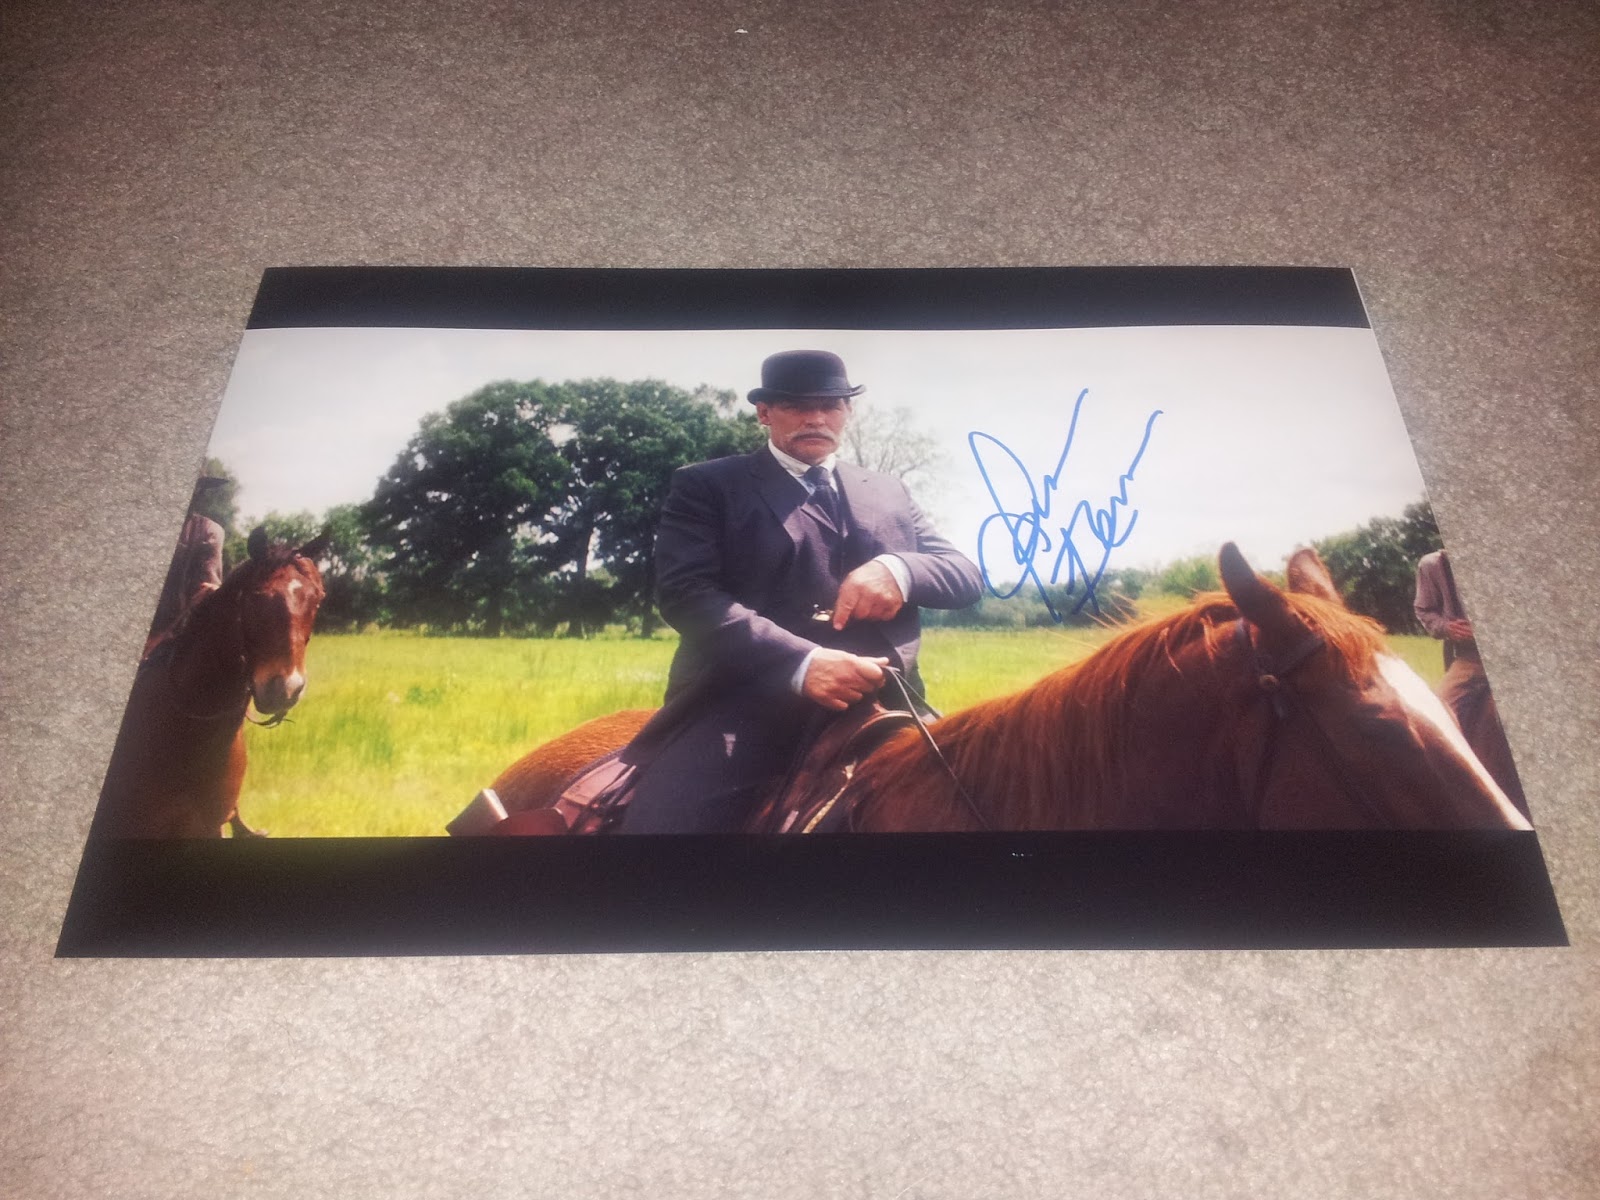 Will The Autograph Guy Butch Pooch Ace Speck Aka James Remar Of Django Unchained Autographs Photos